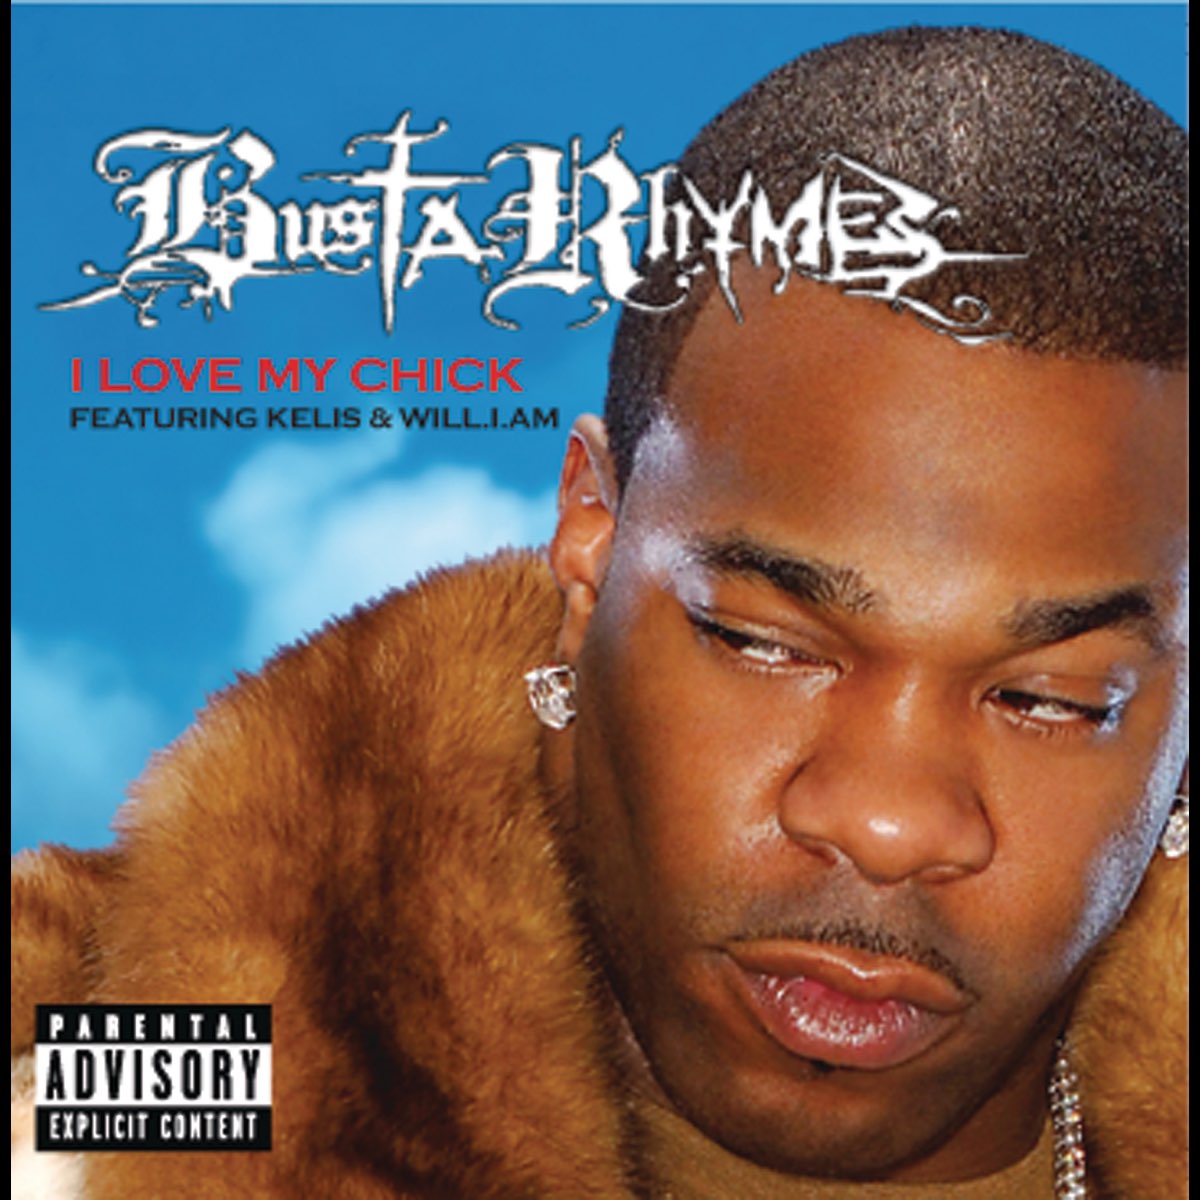 Busta Rhymes ft. featuring will.i.am & Kelis I Love My Chick cover artwork